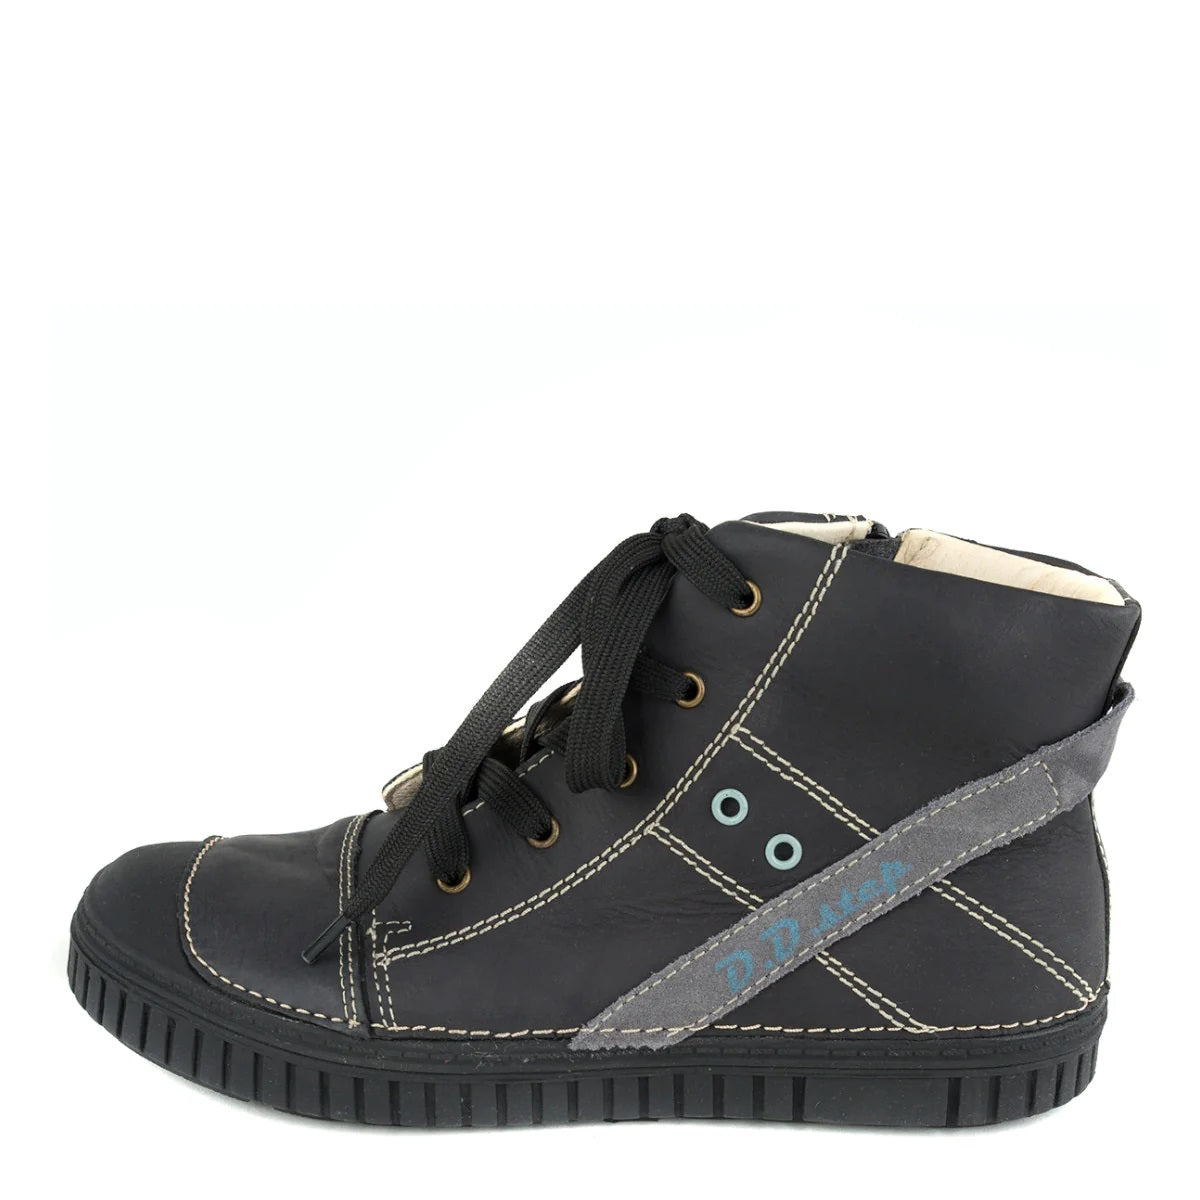 Premium quality high-top sneaker with genuine leather lining and upper black with grey stripe. Thanks to its high level of specialization, D.D. Step knows exactly what your child’s feet need, to develop properly in the various phases of growth. The exceptional comfort these shoes provide assure the well-being and happiness of your child.